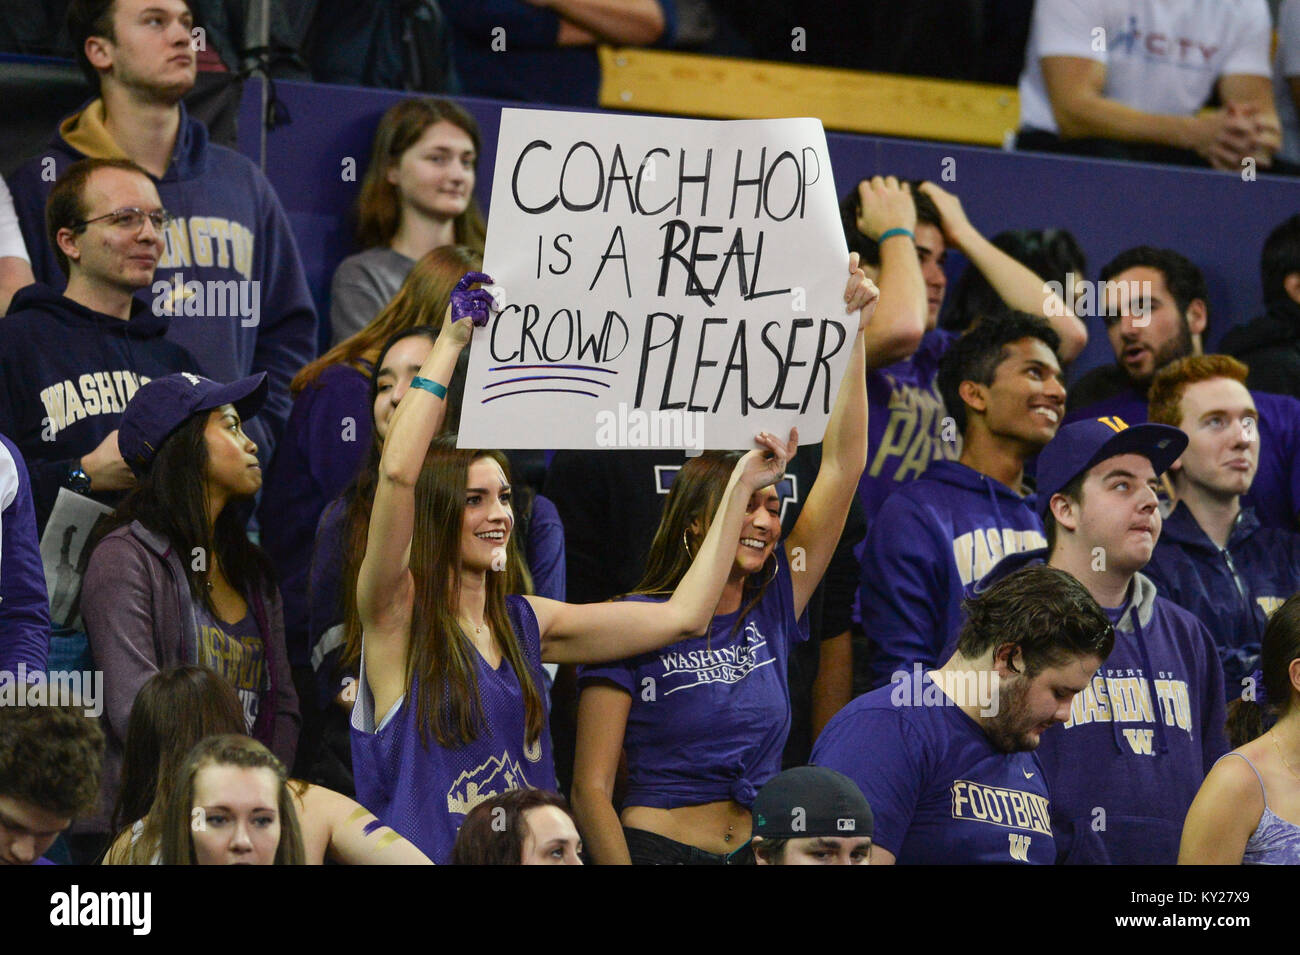 Seattle, WA, USA. 11th Jan, 2018. Dawg Pack fans show their appreciation for Coach Hopkins during a PAC12 basketball game between the Washington Huskies and Cal Bears. The game was played at Hec Ed Pavilion in Seattle, WA. Jeff Halstead/CSM/Alamy Live News Stock Photo